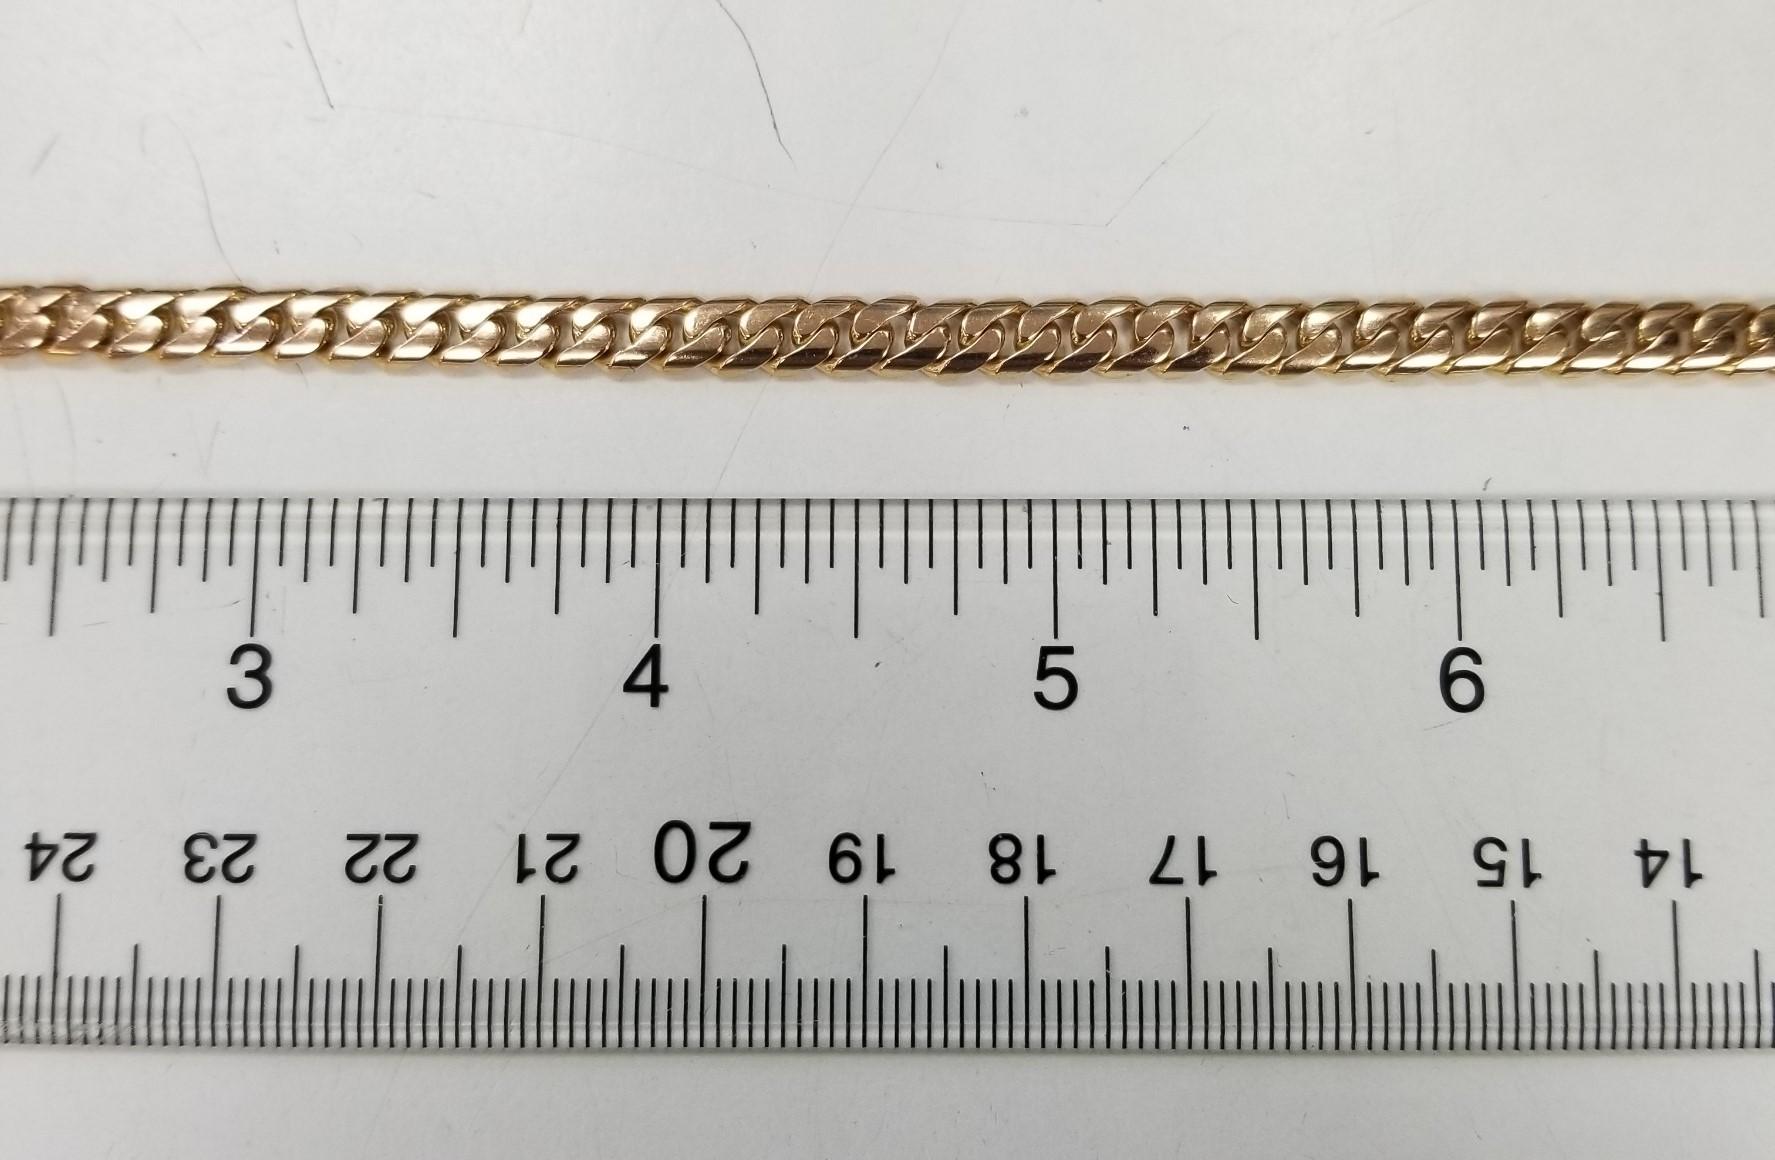 Specifications:
Pre-Owned (Great condition)
Metal: 18k Gold
Weight: 53.5 Gr
Length: 24 inch
Width: 5.5mm
Clasp: double clasp for safety 